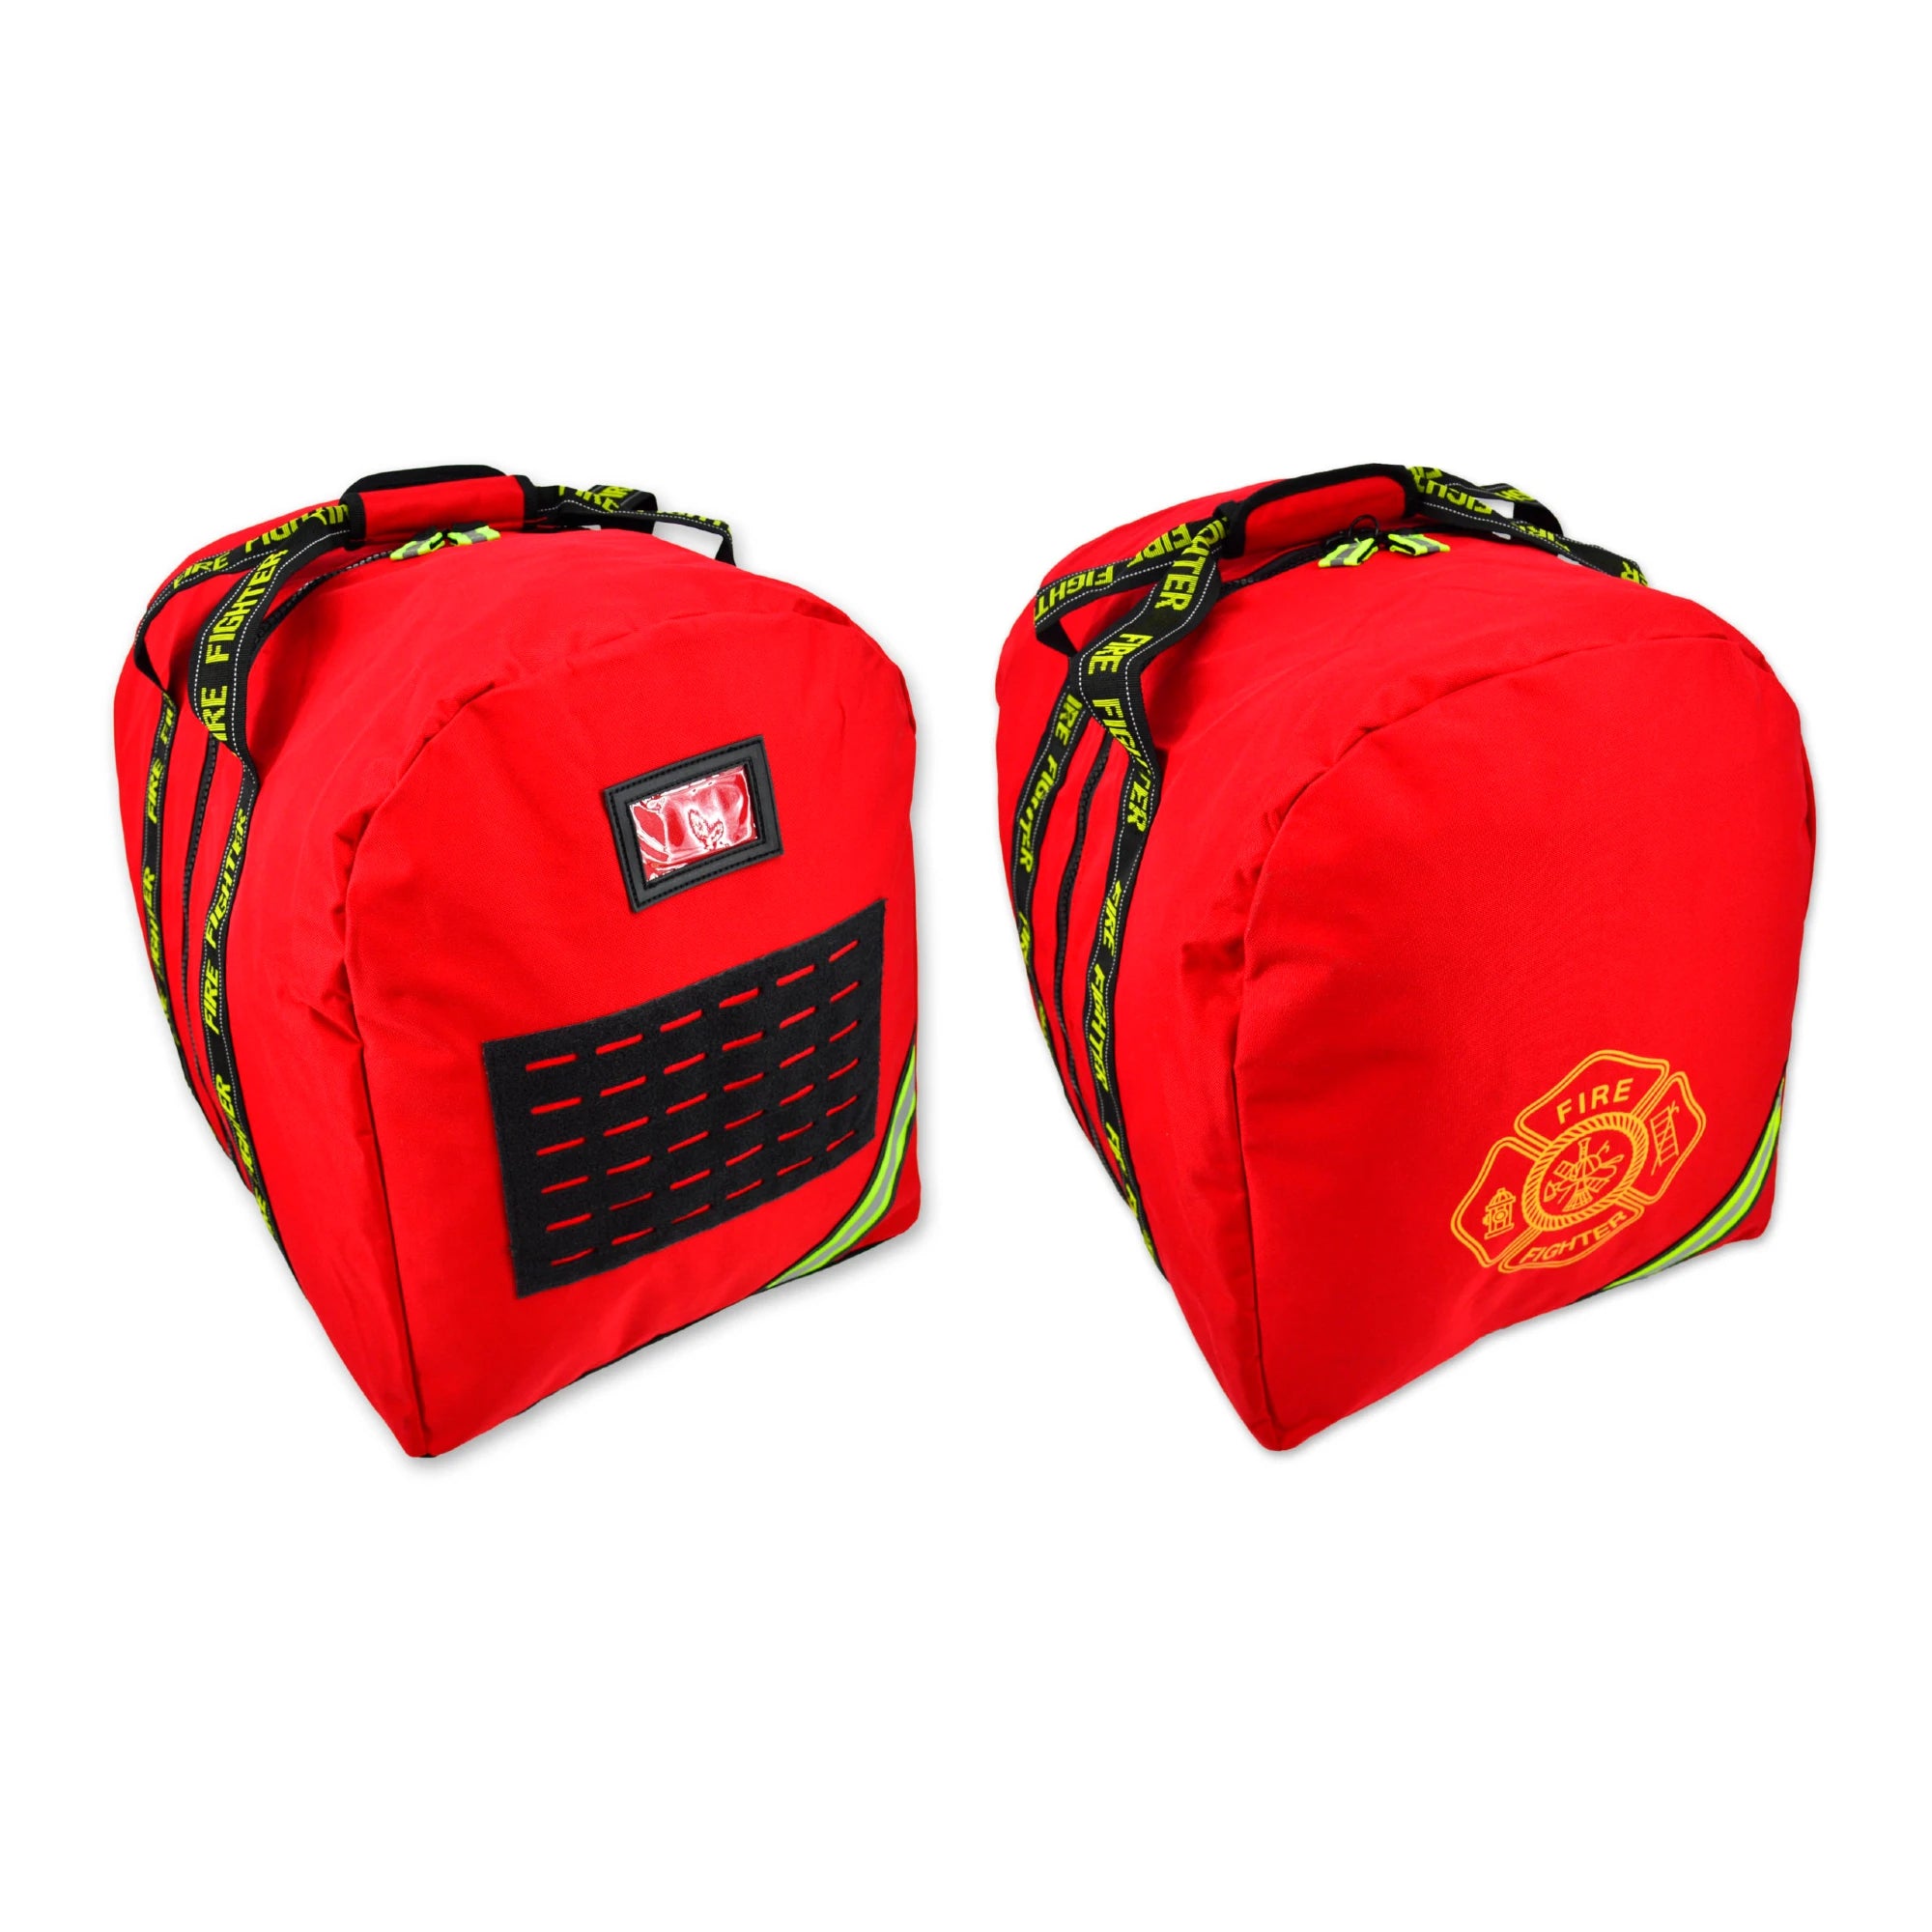 Deluxe XXXL Turnout Gear Bag with Wheels - Onesource Fire Rescue Equipment